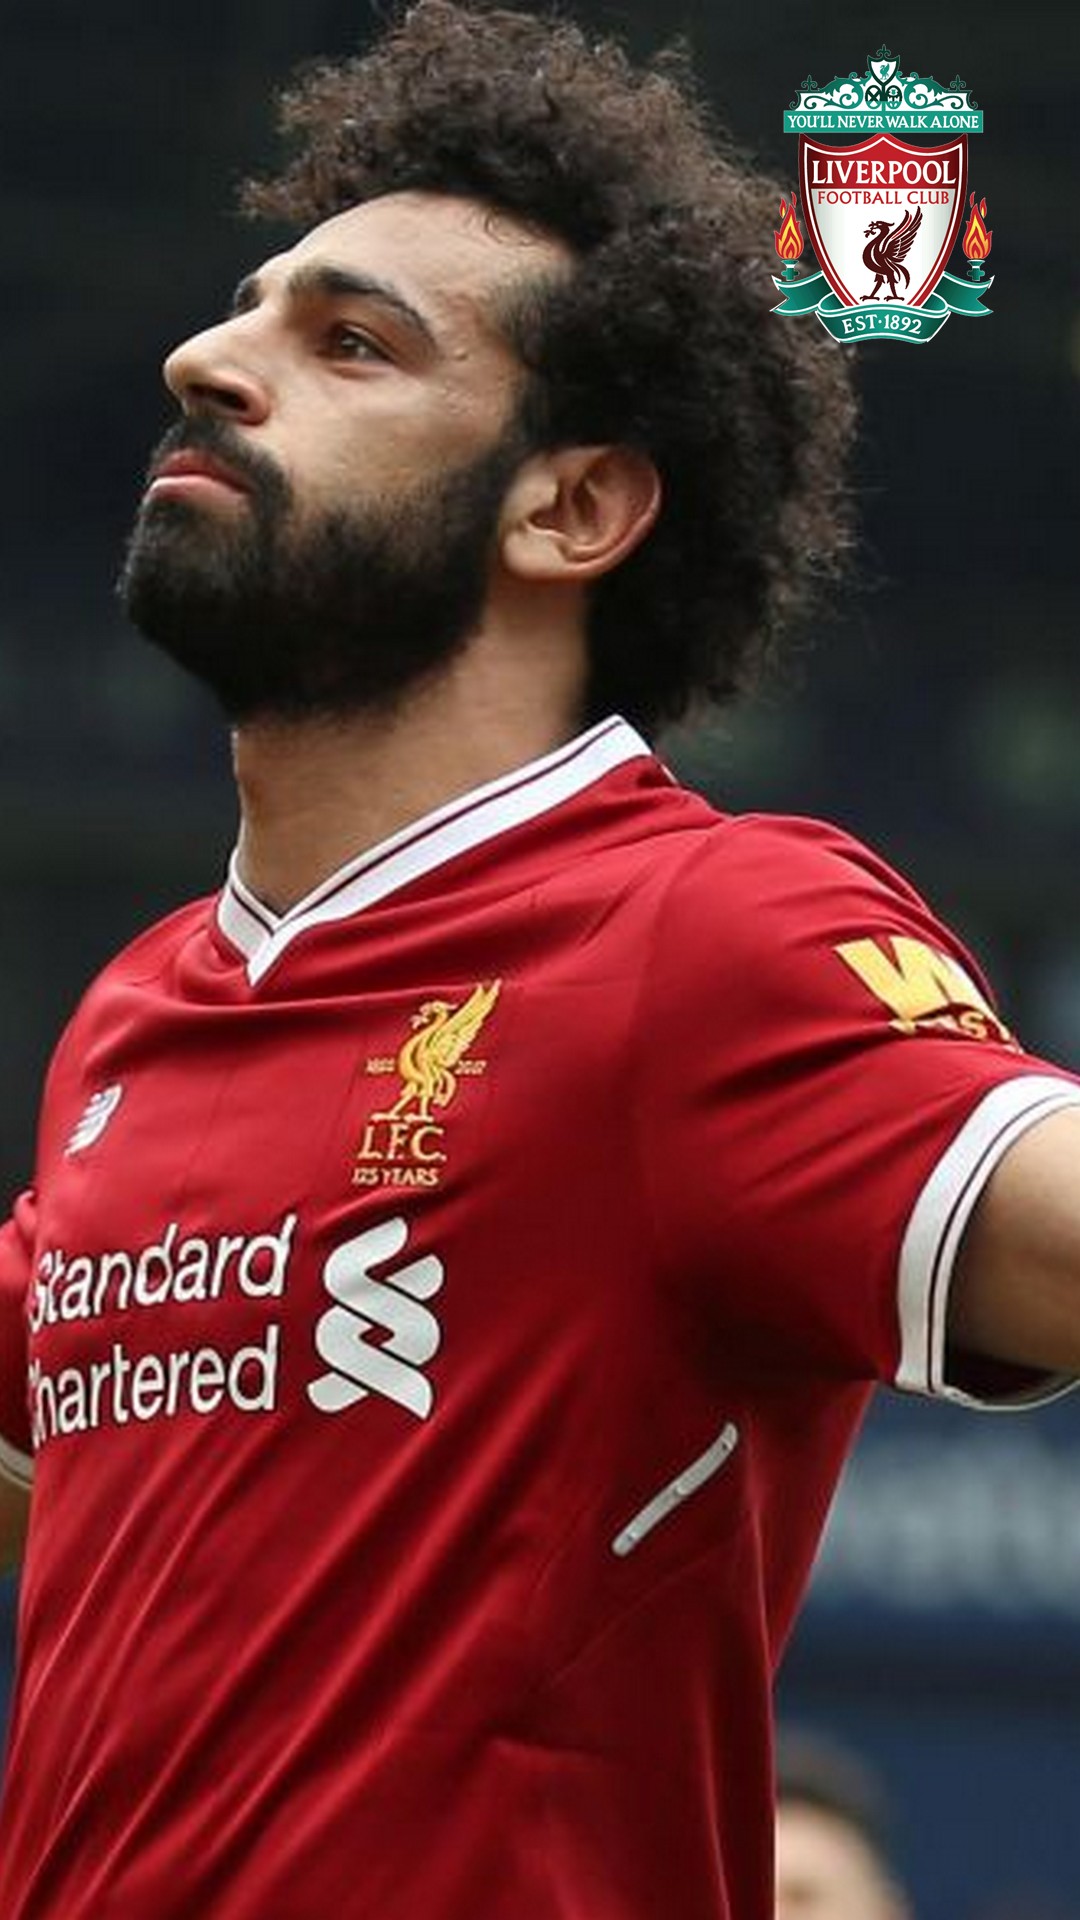 Mohamed Salah Pictures Wallpaper iPhone with image resolution 1080x1920 pixel. You can make this wallpaper for your iPhone 5, 6, 7, 8, X backgrounds, Mobile Screensaver, or iPad Lock Screen